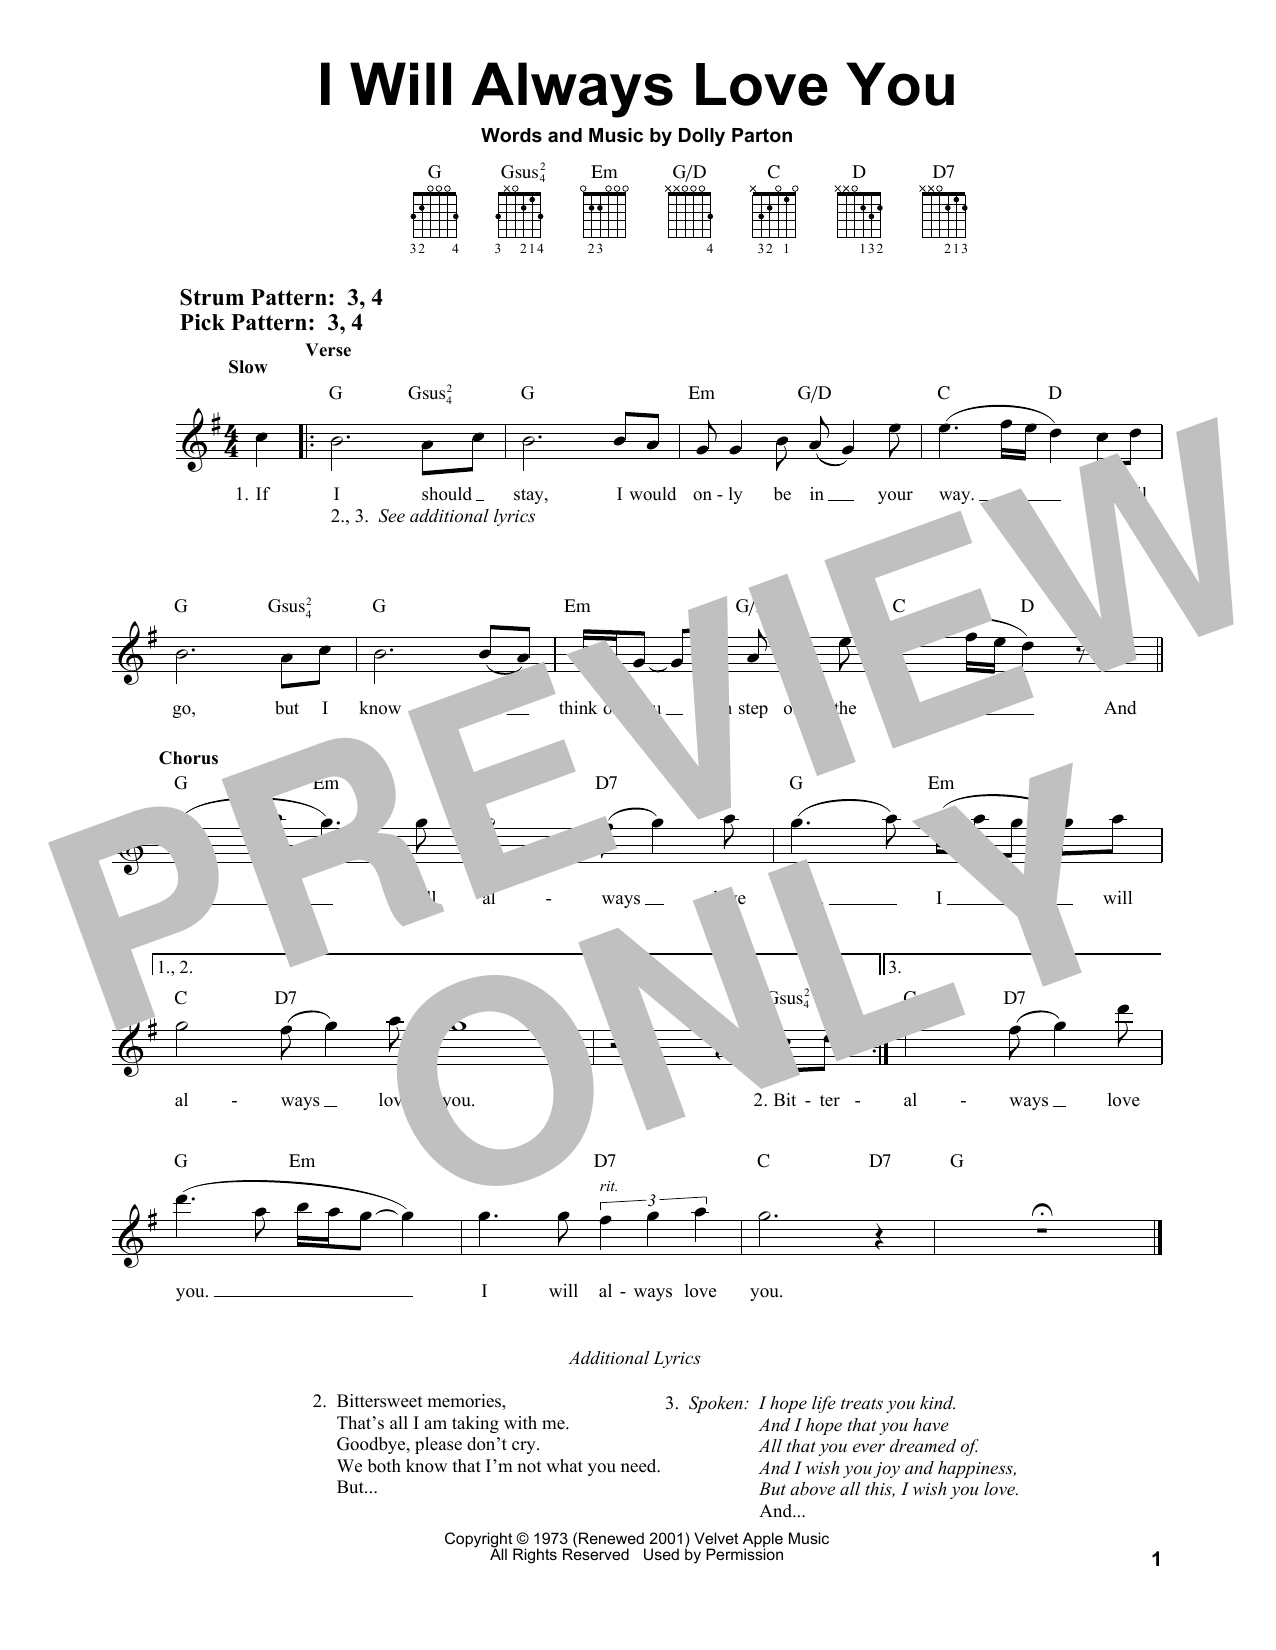 Download Dolly Parton I Will Always Love You Sheet Music